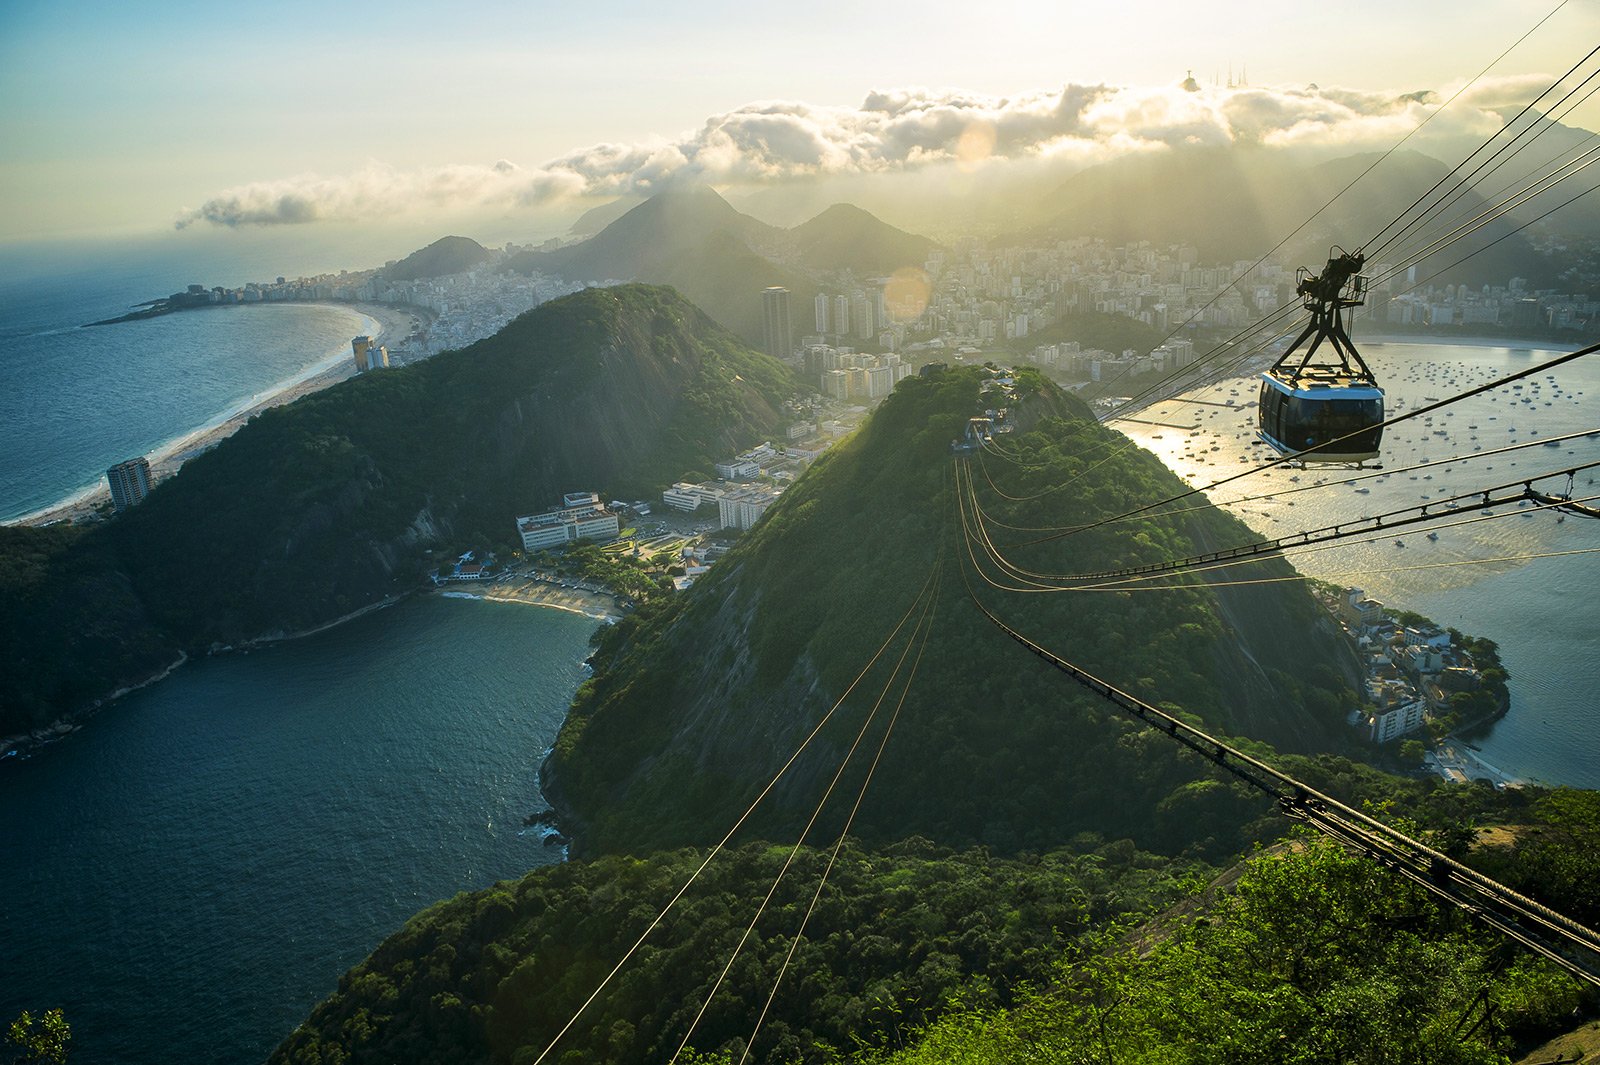 How to climb the top of Sugarloaf by the cableway in Rio de Janeiro